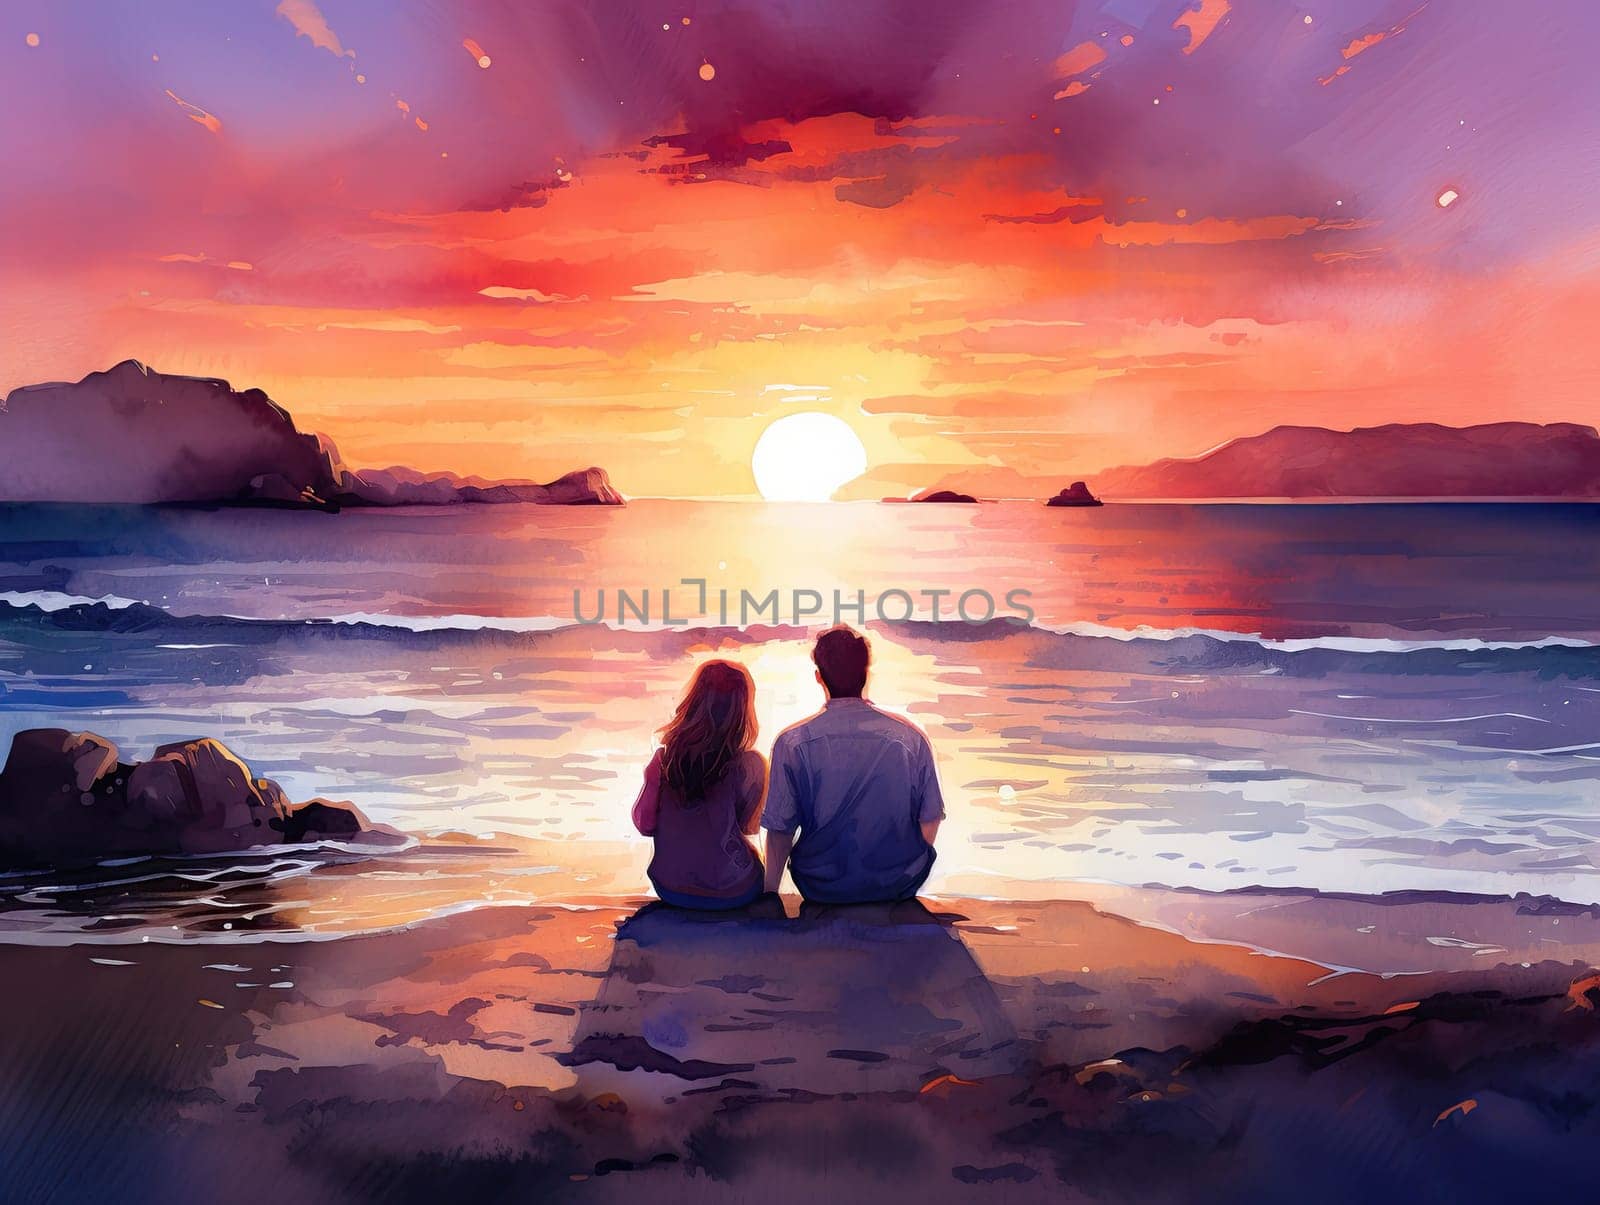 Water color painting romantic scene of young couple sitting on a beach at sunset.